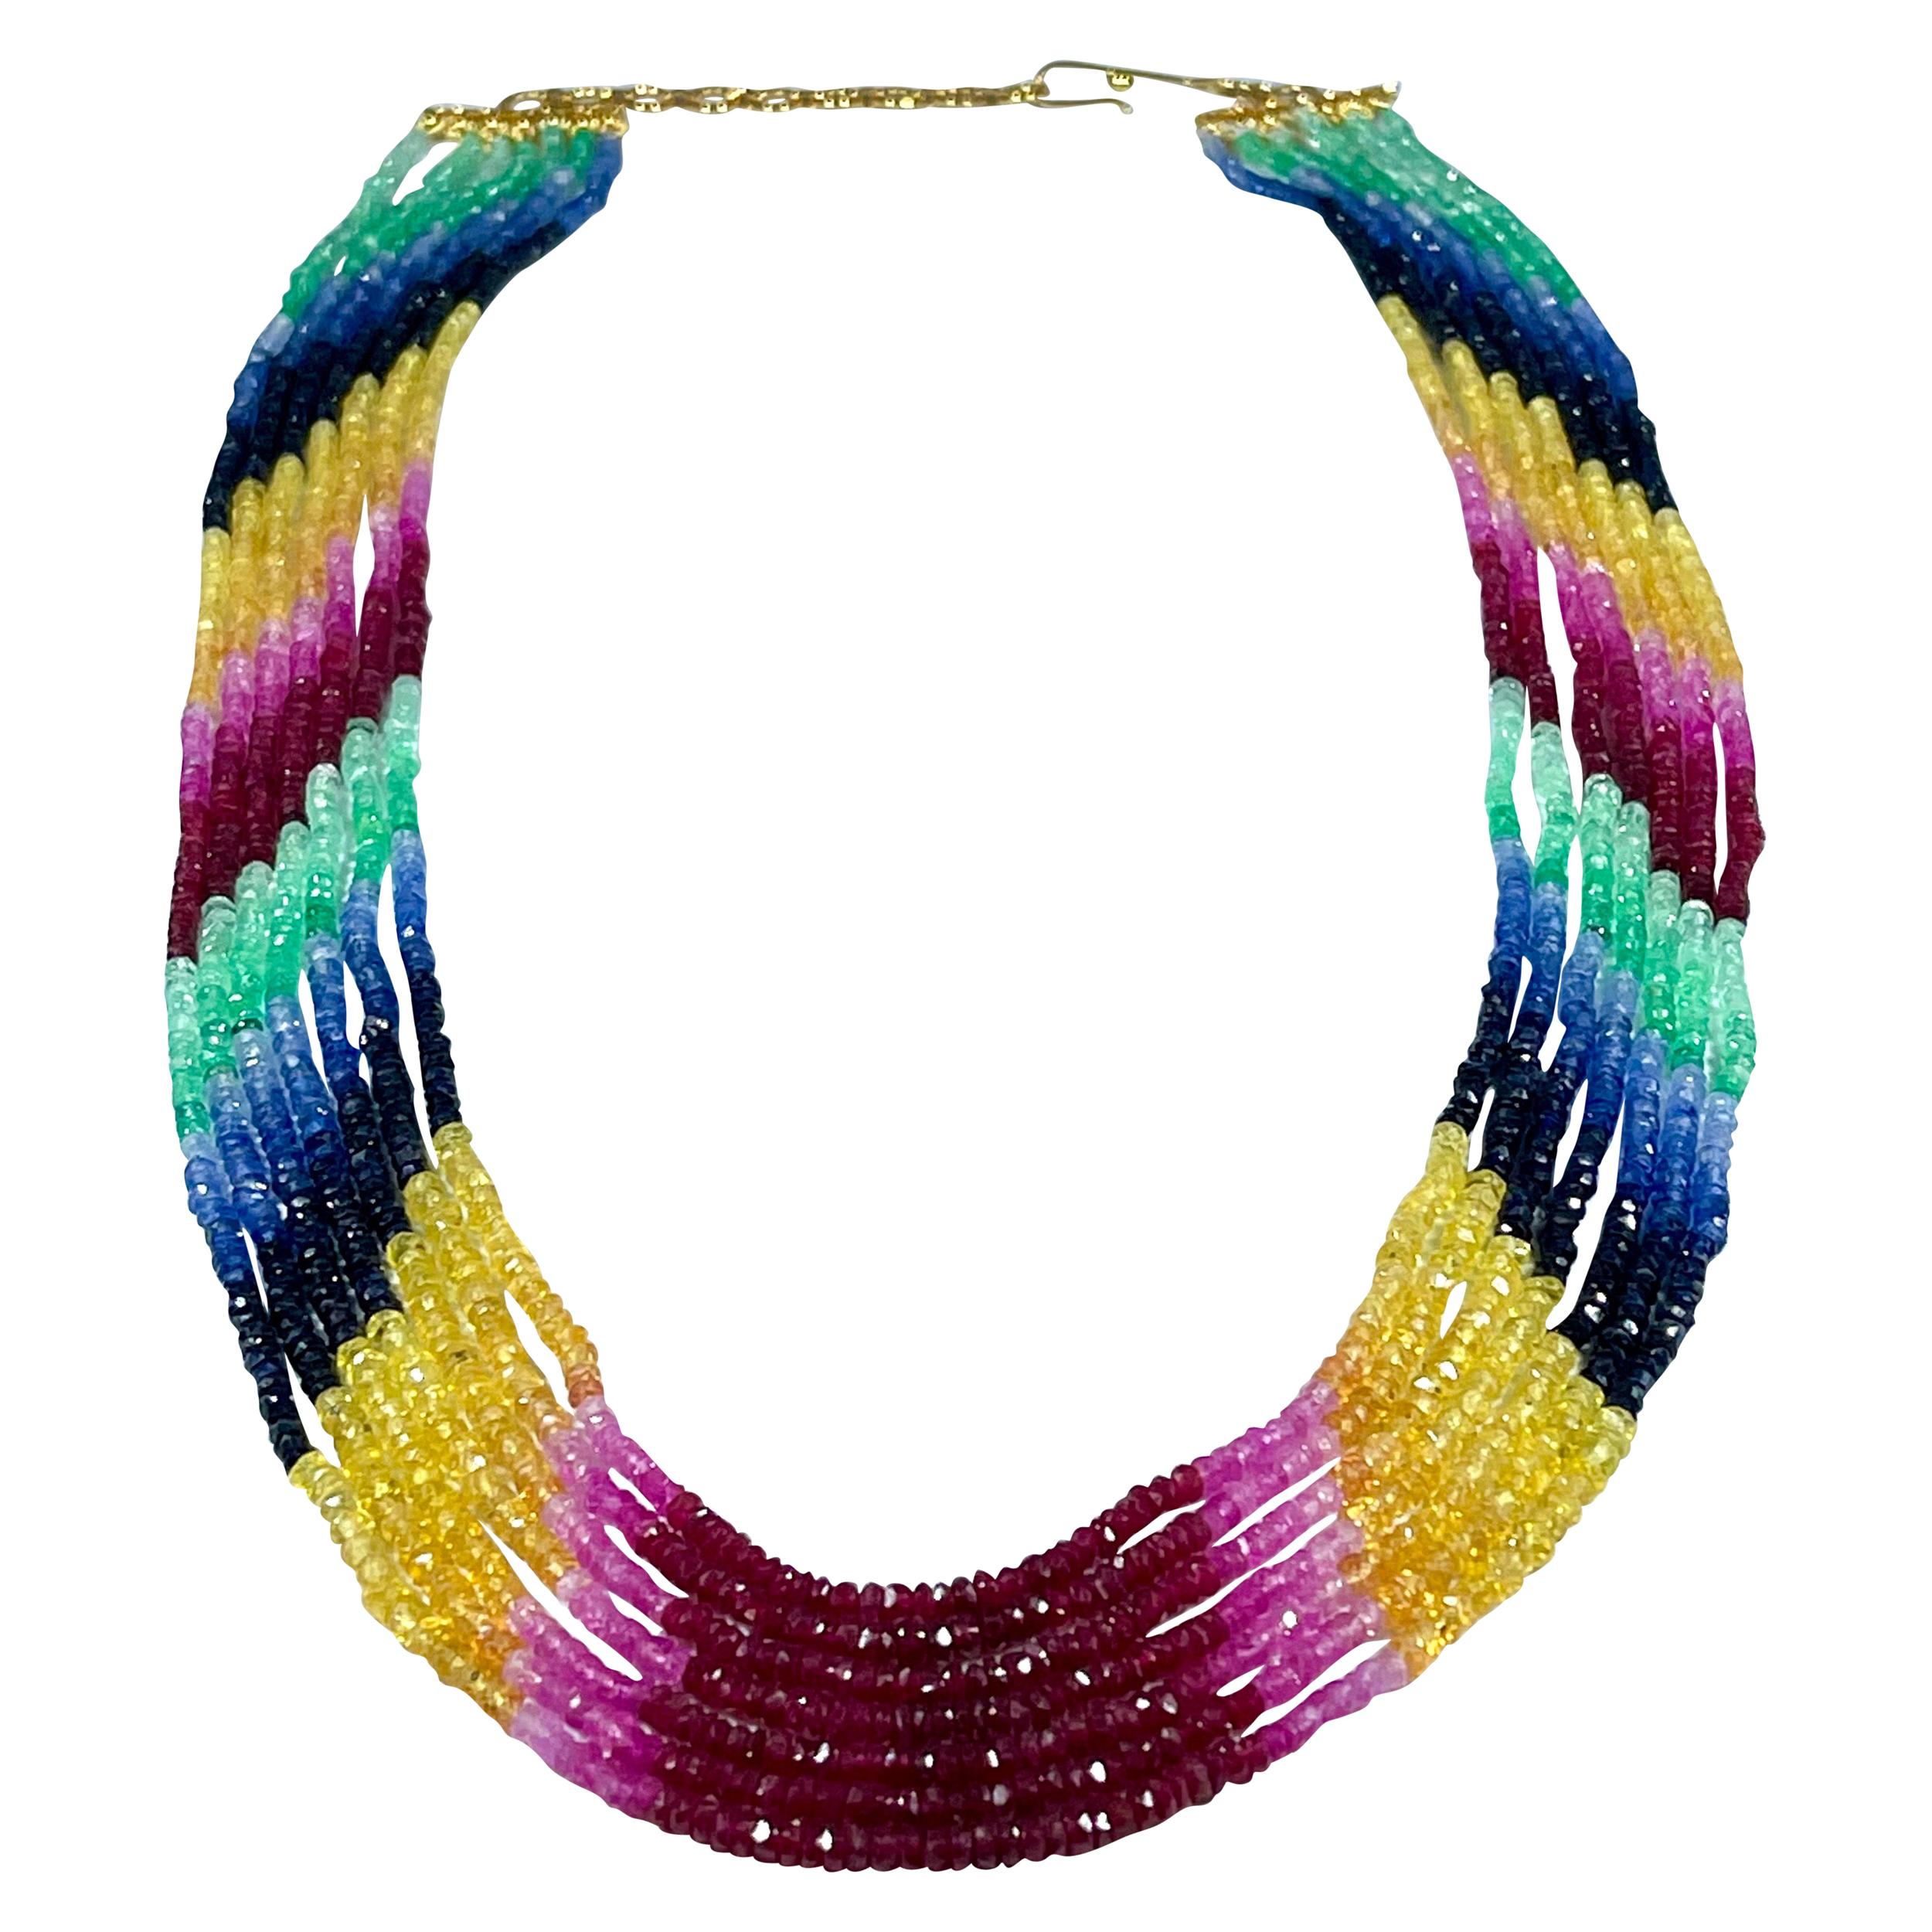 Approximately 200 Ct 7 Layer Faceted  Natural Emerald Ruby & Sapphire Bead Necklace  14 Karat Gold adjustable Clasp
This spectacular Necklace   consisting of approximately 200 Ct   of  Fine and natural beads of all precious stones ,,, Emerald , ruby